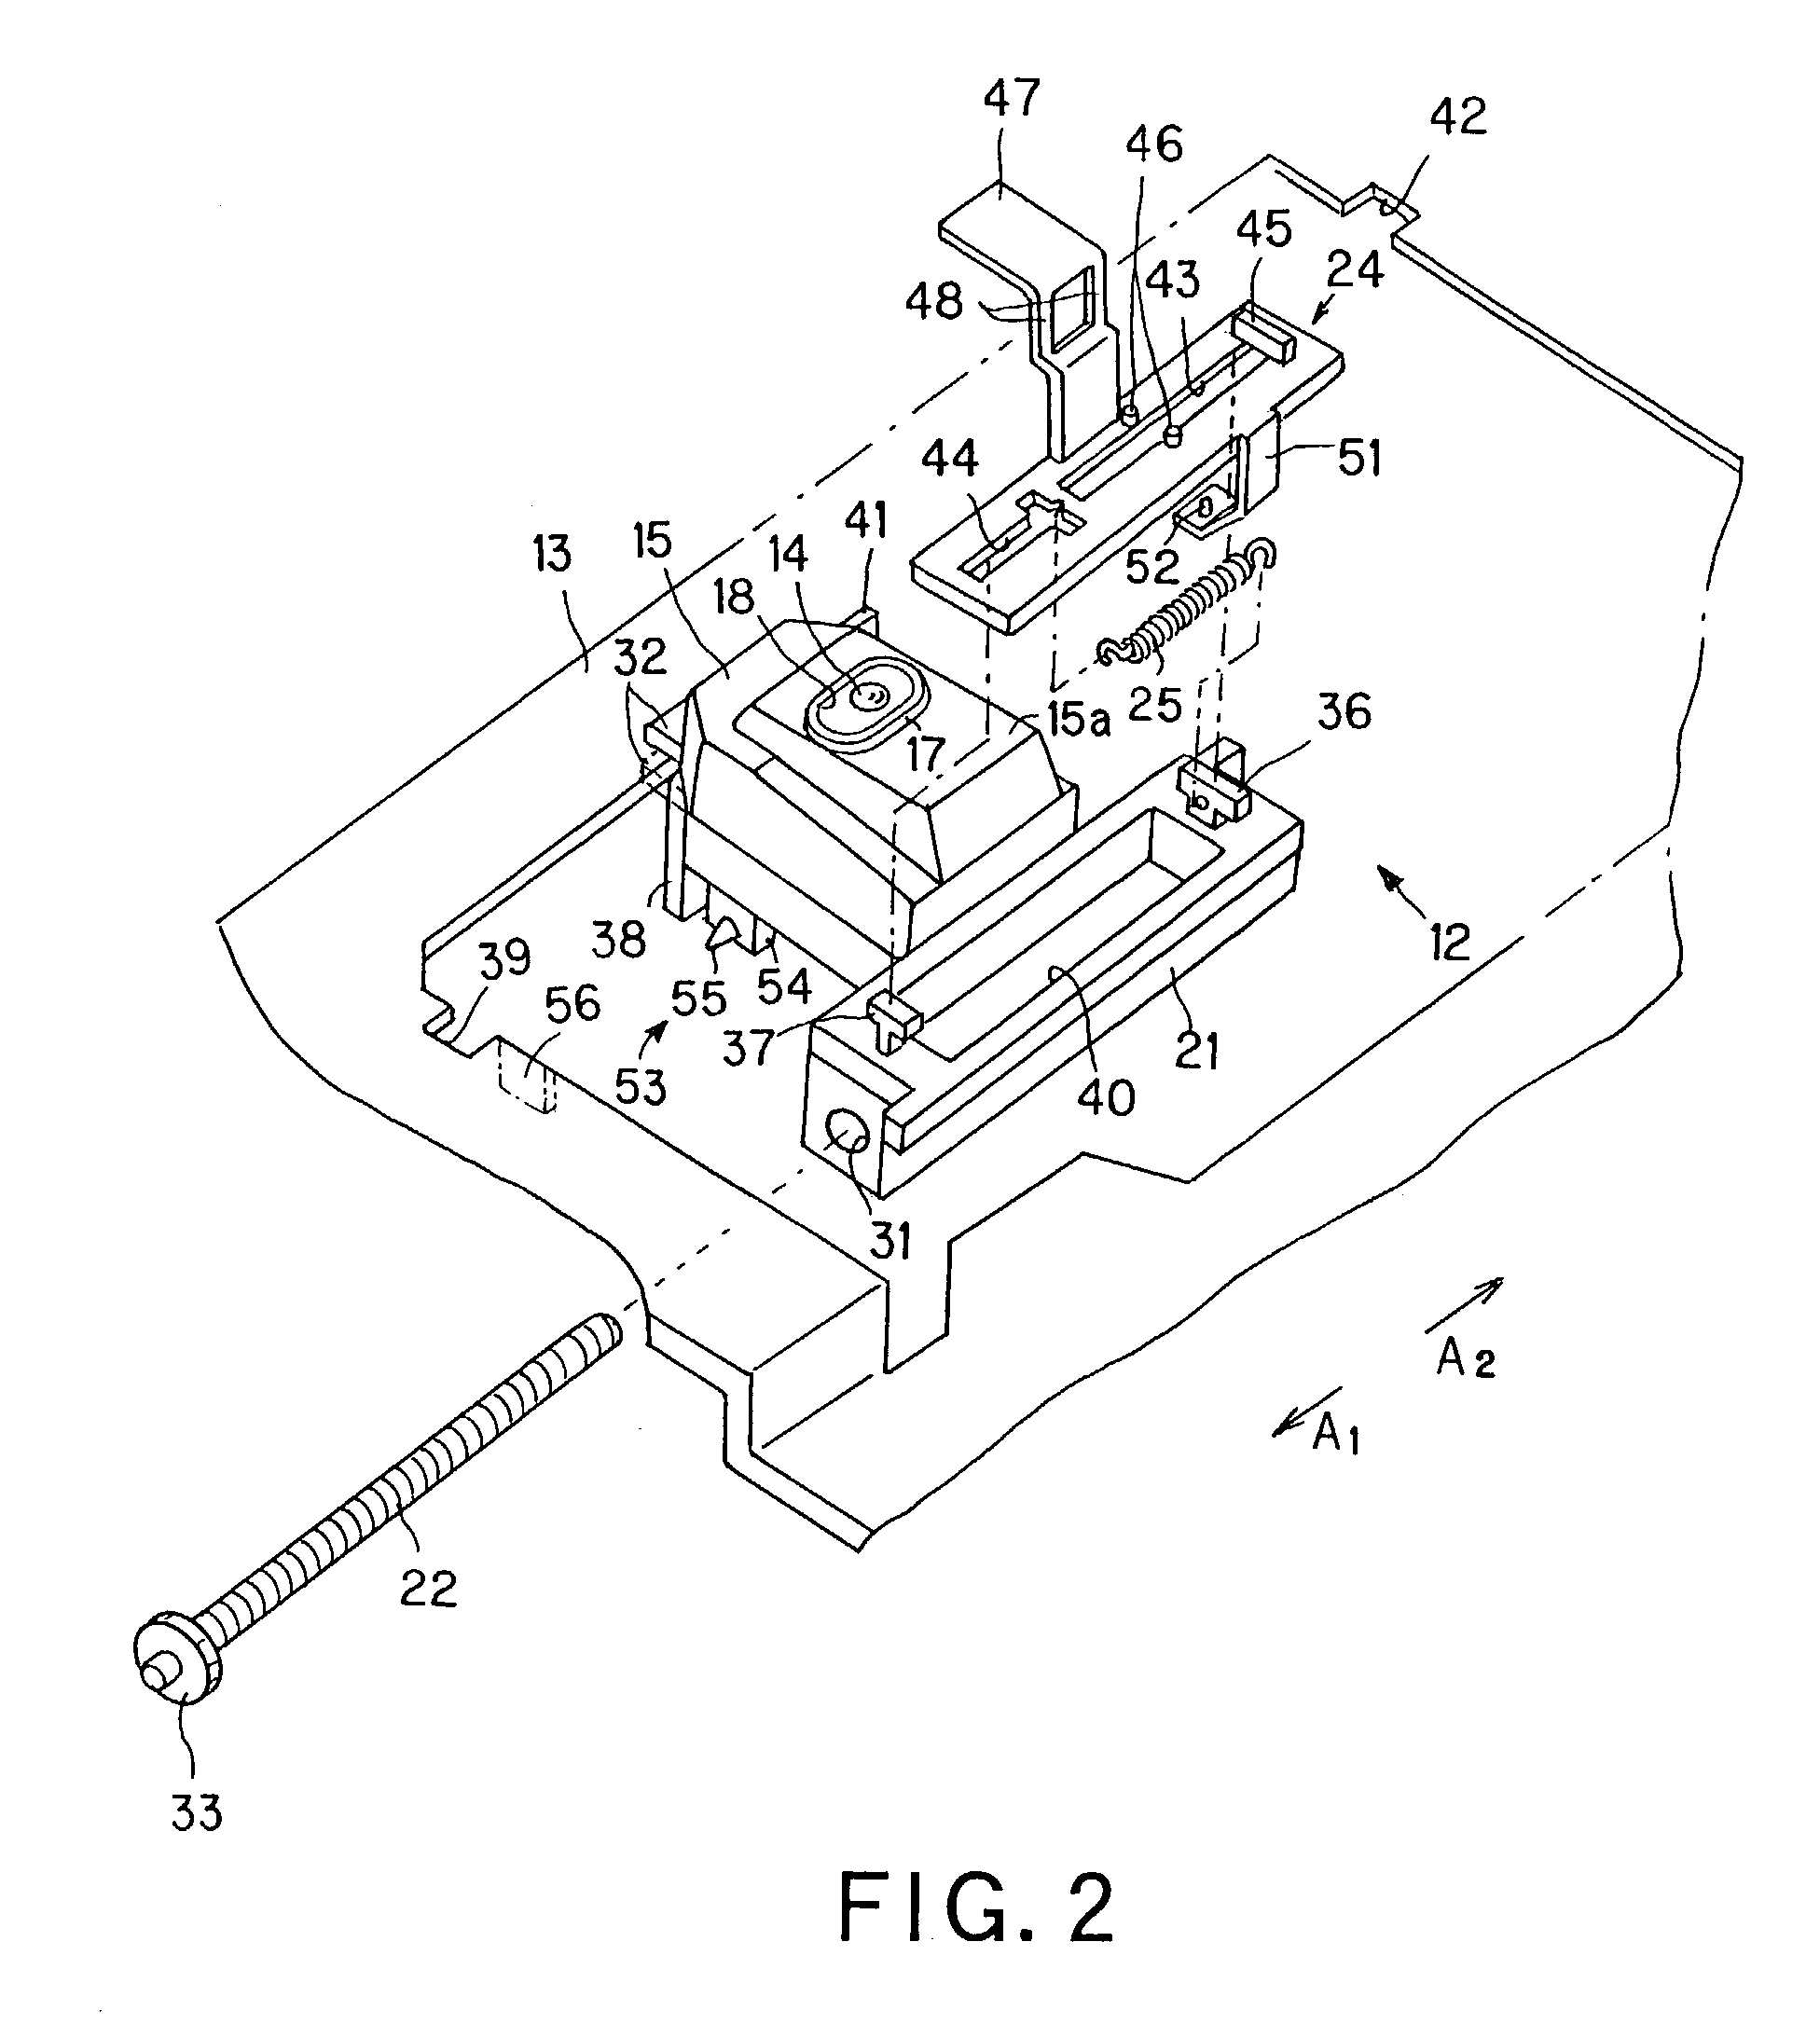 Optical pickup device, and recorder and/or player